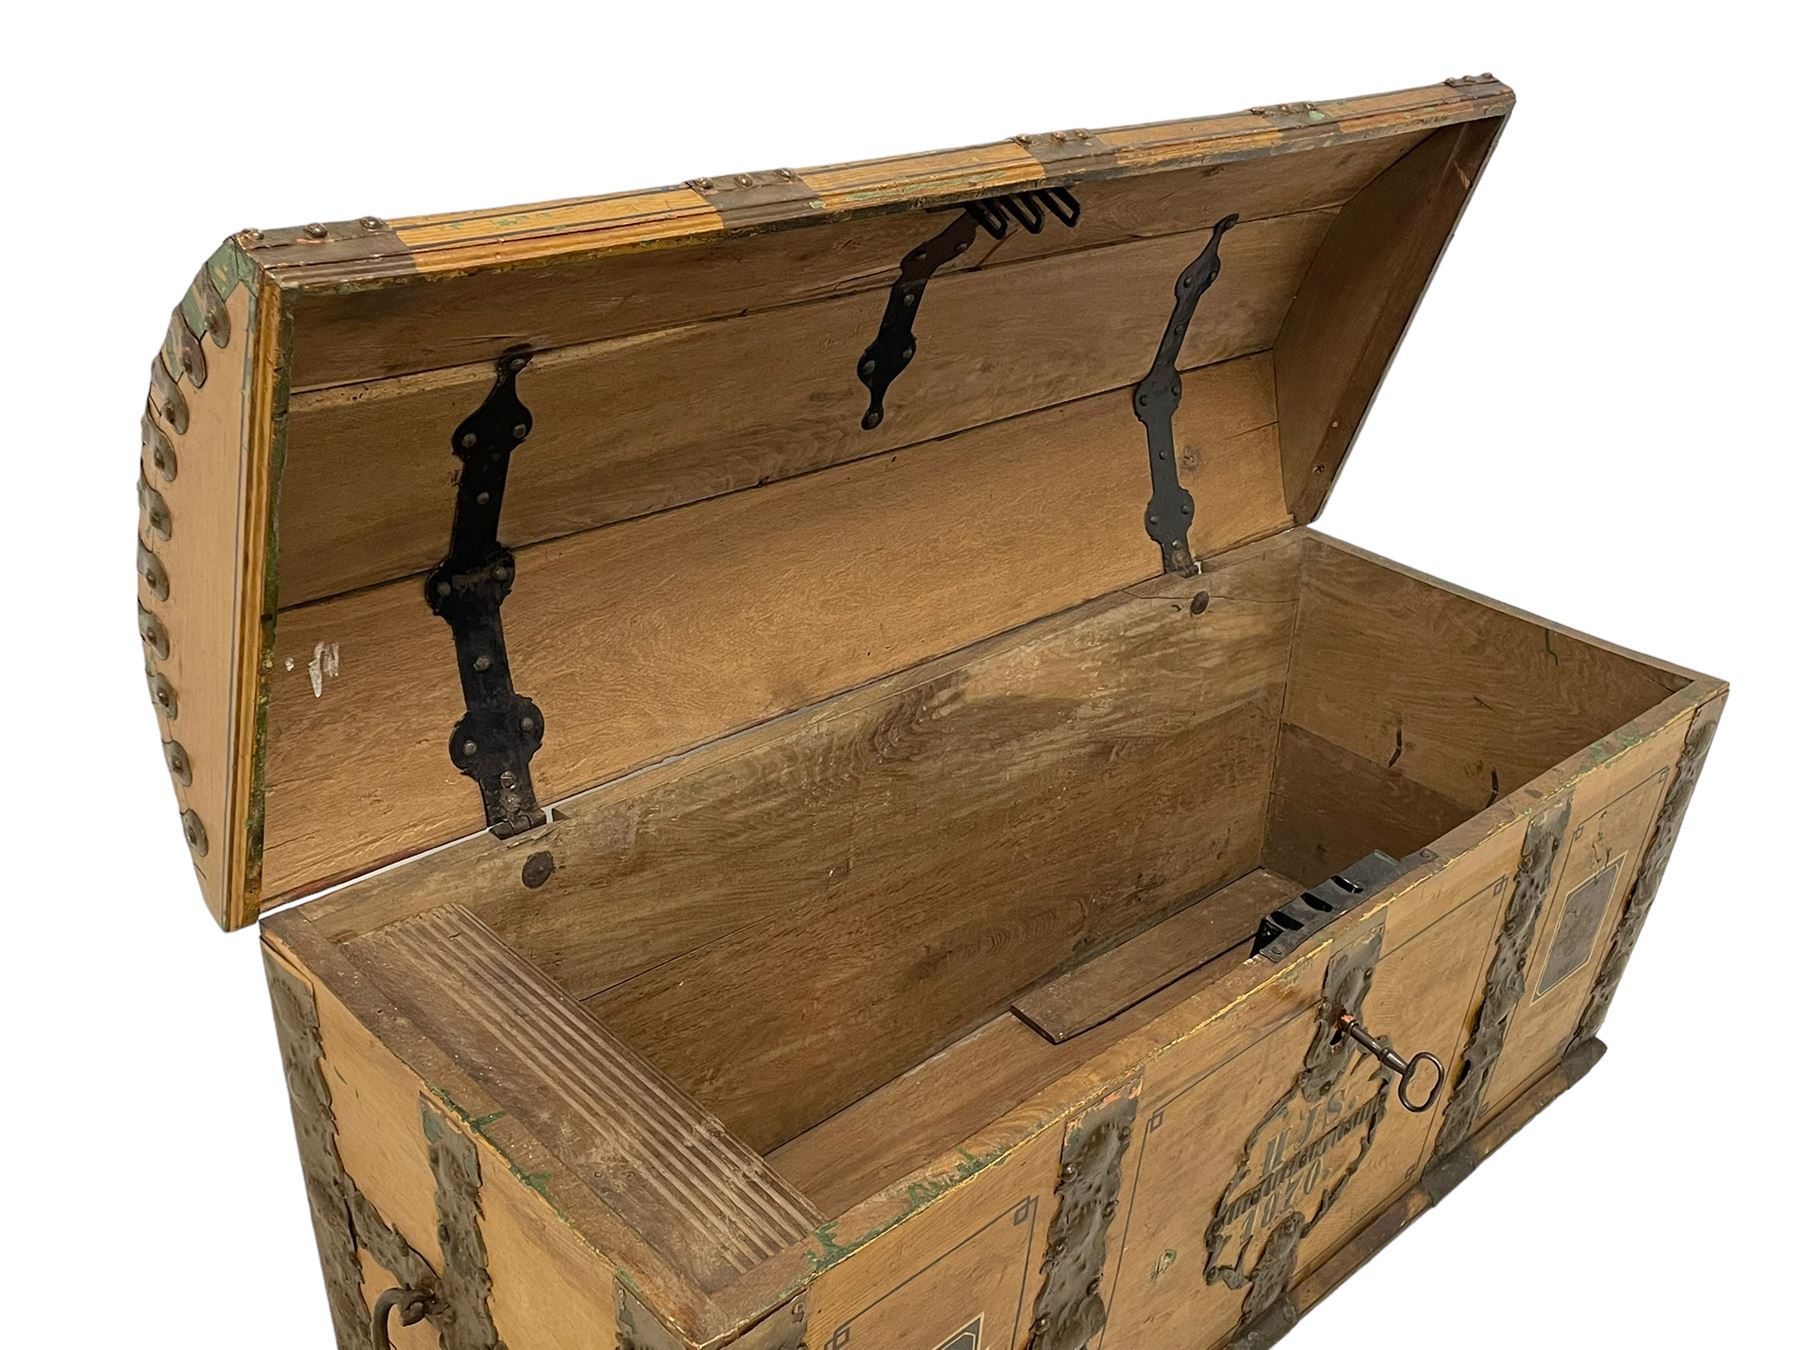 19th century Northern European painted oak sea chest - Image 26 of 29